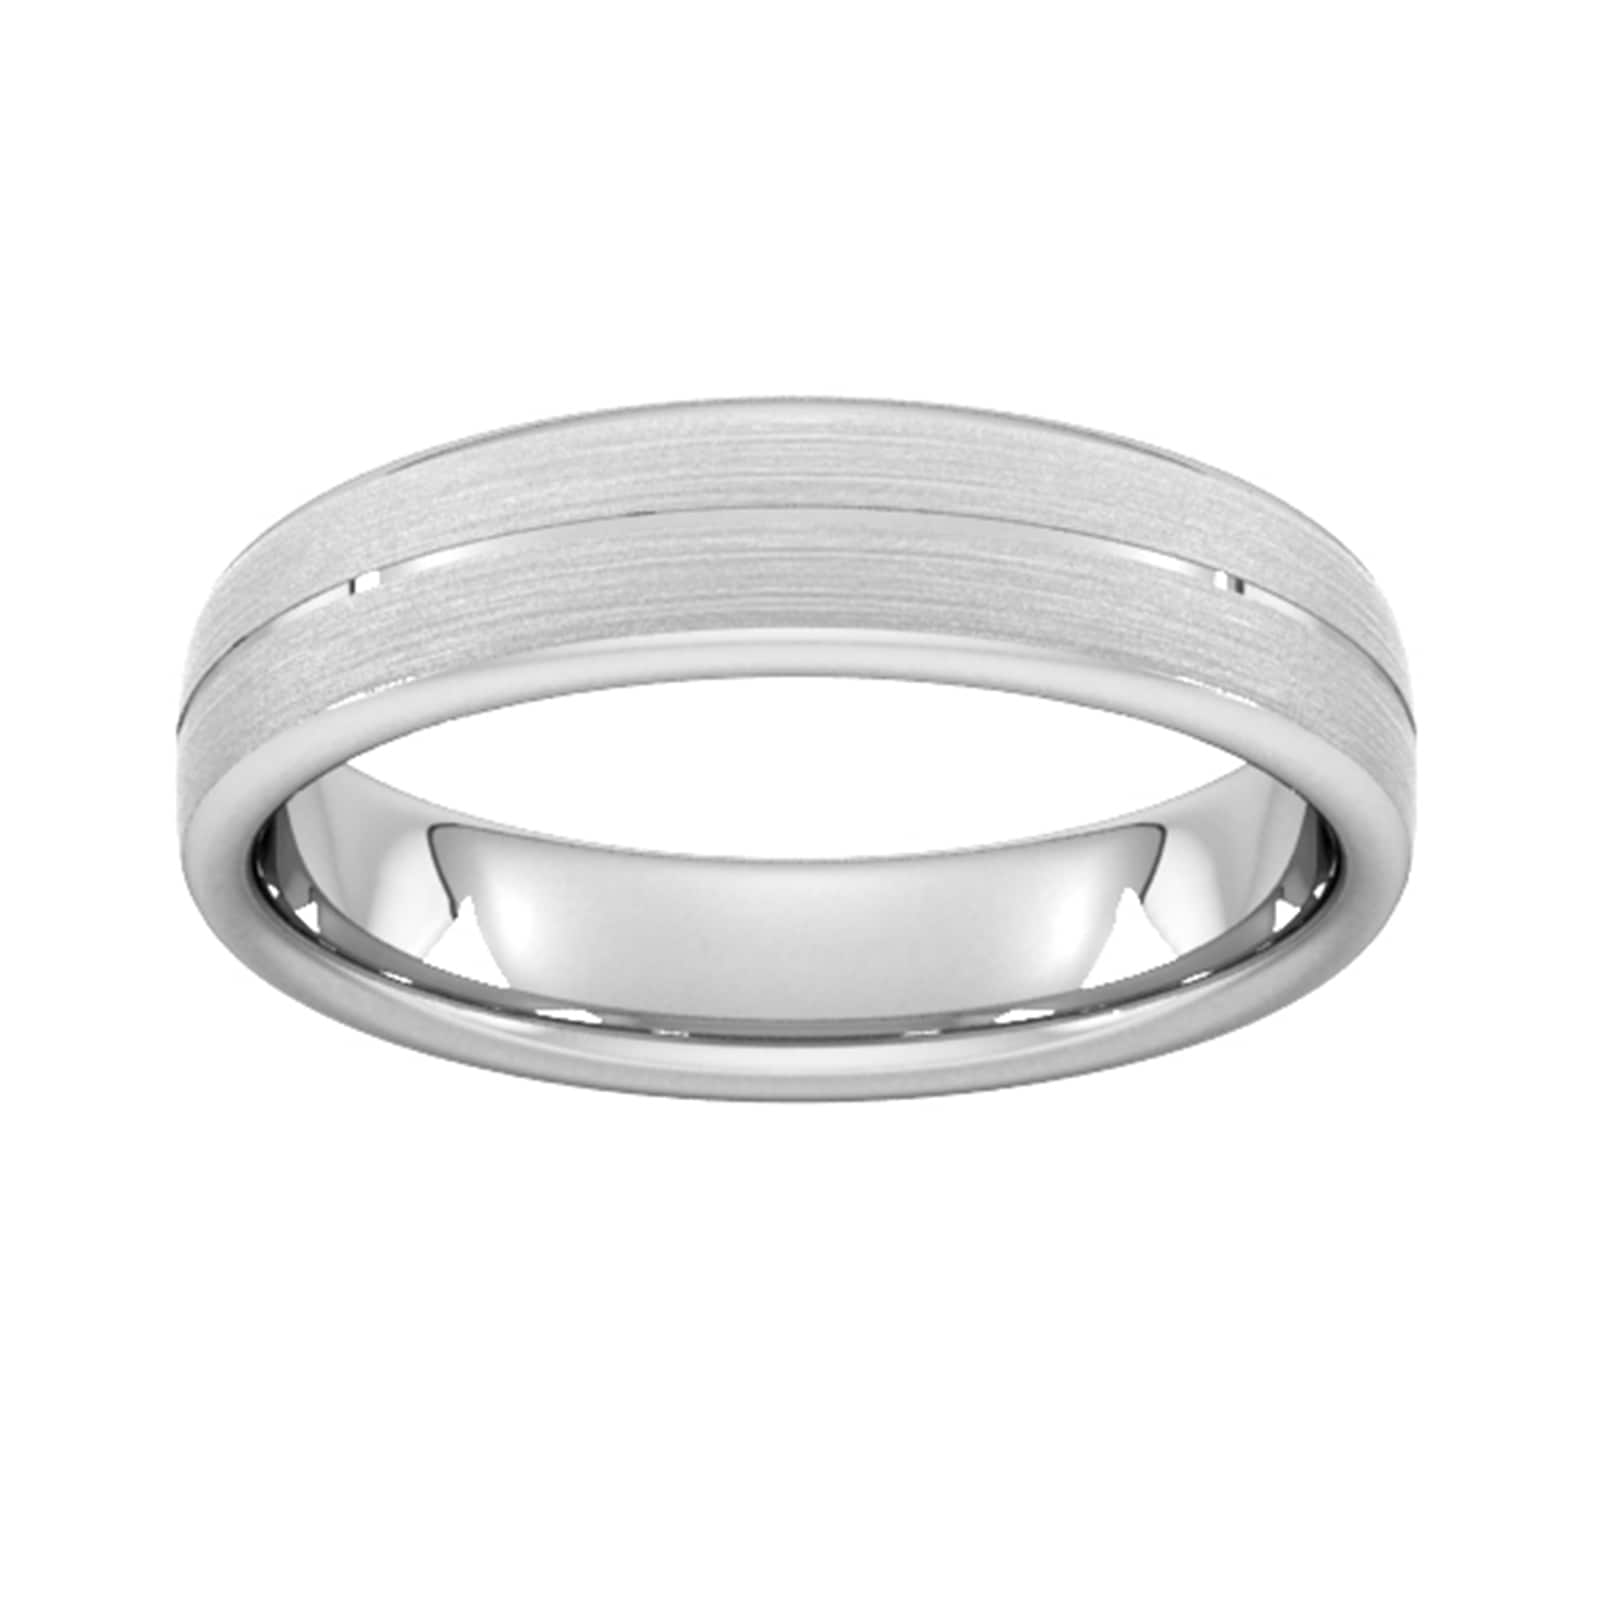 5mm Traditional Court Heavy Centre Groove With Chamfered Edge Wedding Ring In 18 Carat White Gold - Ring Size L